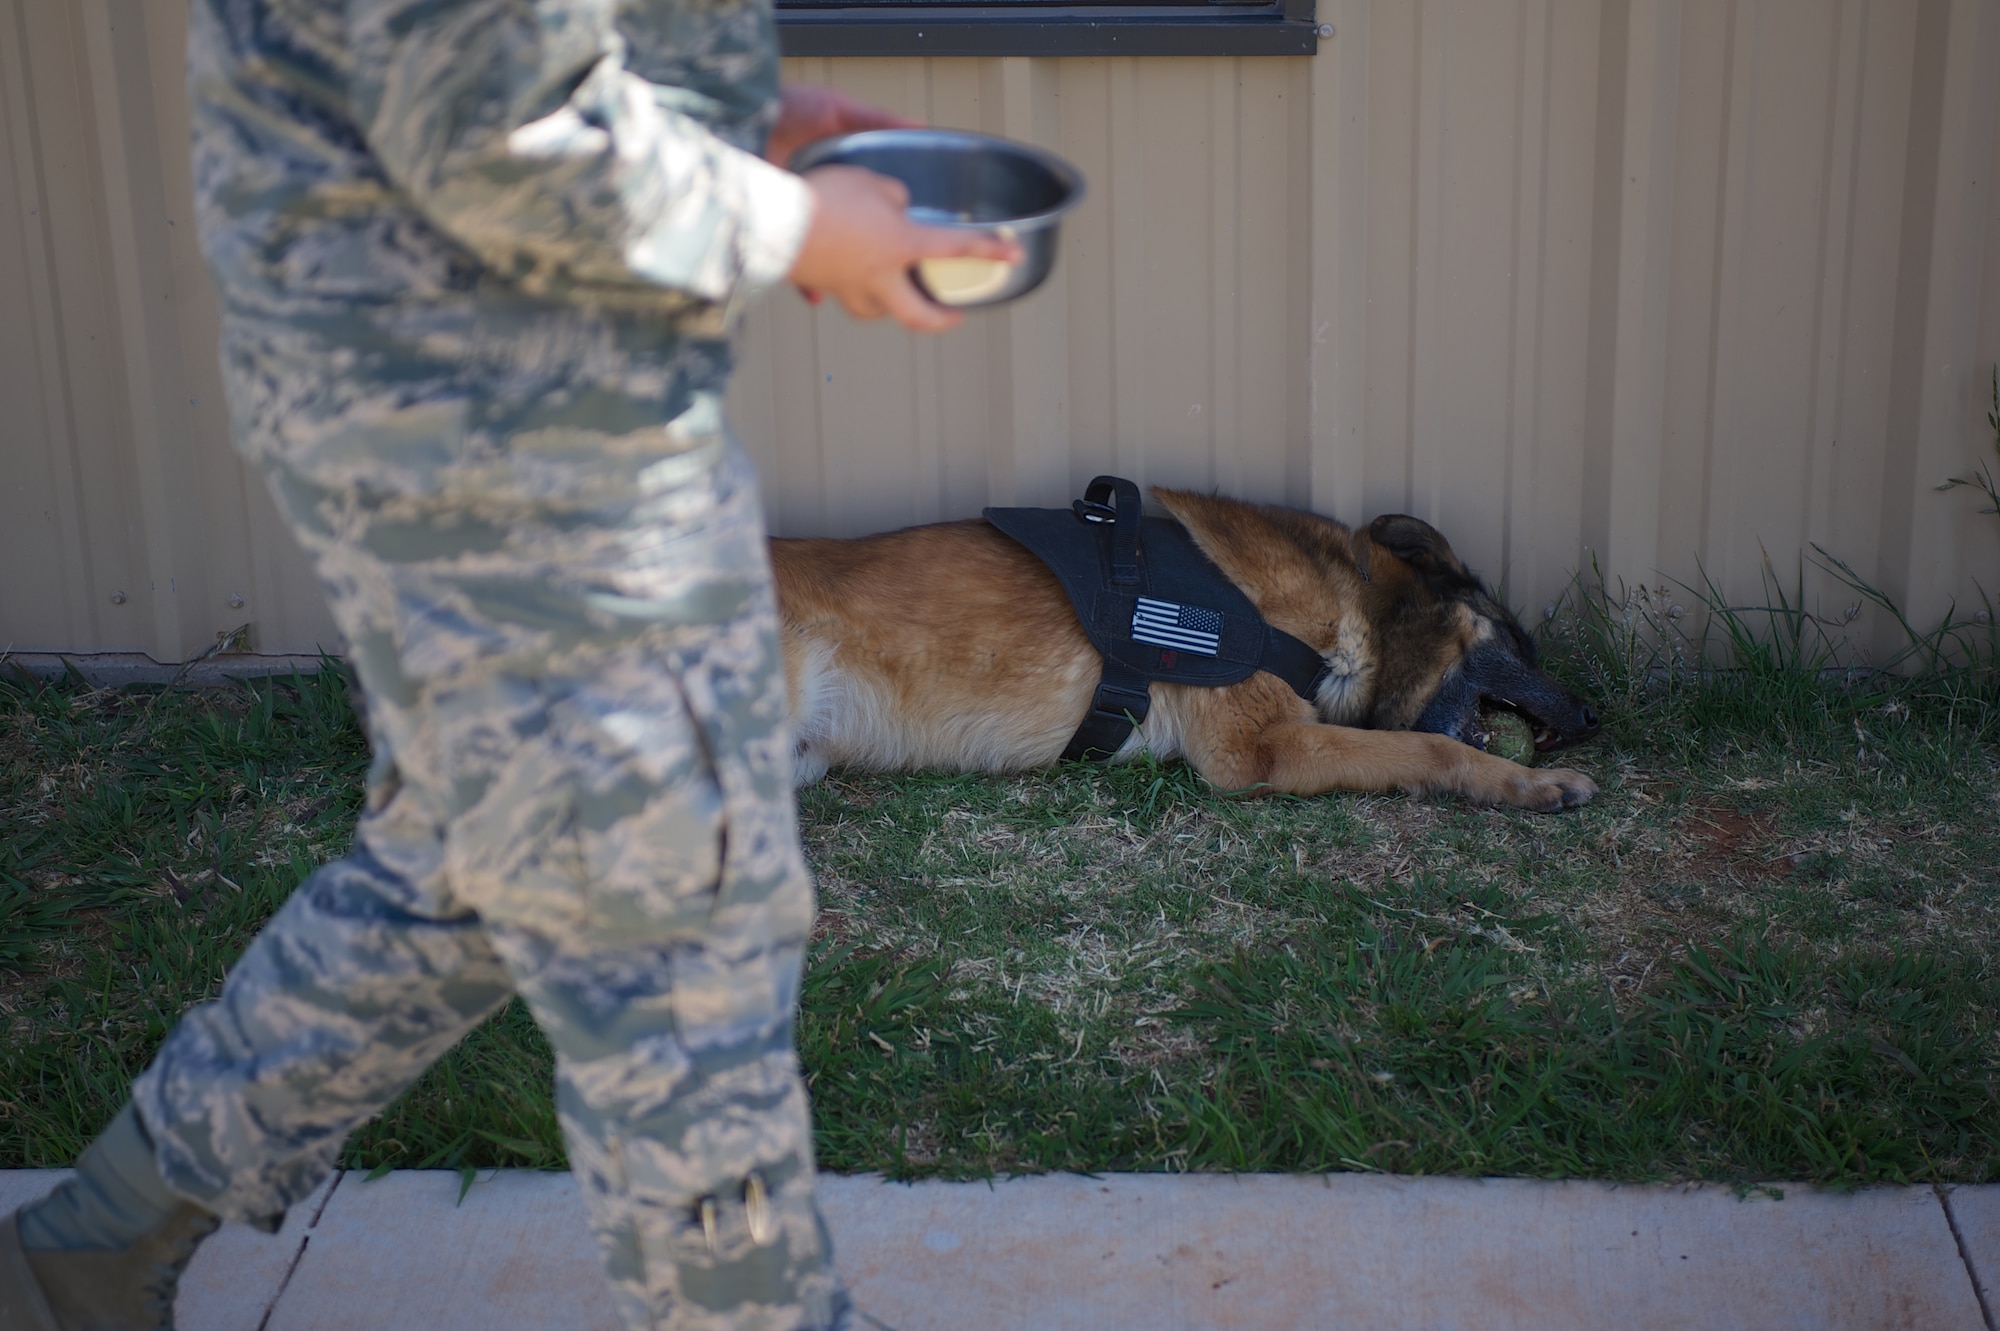 U.S. Air Force 2nd. Lt. Karrissa Garza, 7th Logistics Readiness Squadron, retrieves a bowl of water while military working dog (MWD) Condor chews on a ball March 26, 2013, at the 7th Security Forces Squadron MWD Compound on Dyess Air Force Base Texas. Garza is in the process of adopting Condor upon his retirement from the Air Force and pays frequent visits in order to form a bond with the dog. Condor, an 8 year old belgian malinois, is a veteran of Operation Iraqi Freedom as well as supported the U.S. Secret Service. (U.S. Air Force Photo by Tech. Sgt. Joshua T. Jasper/Released)
